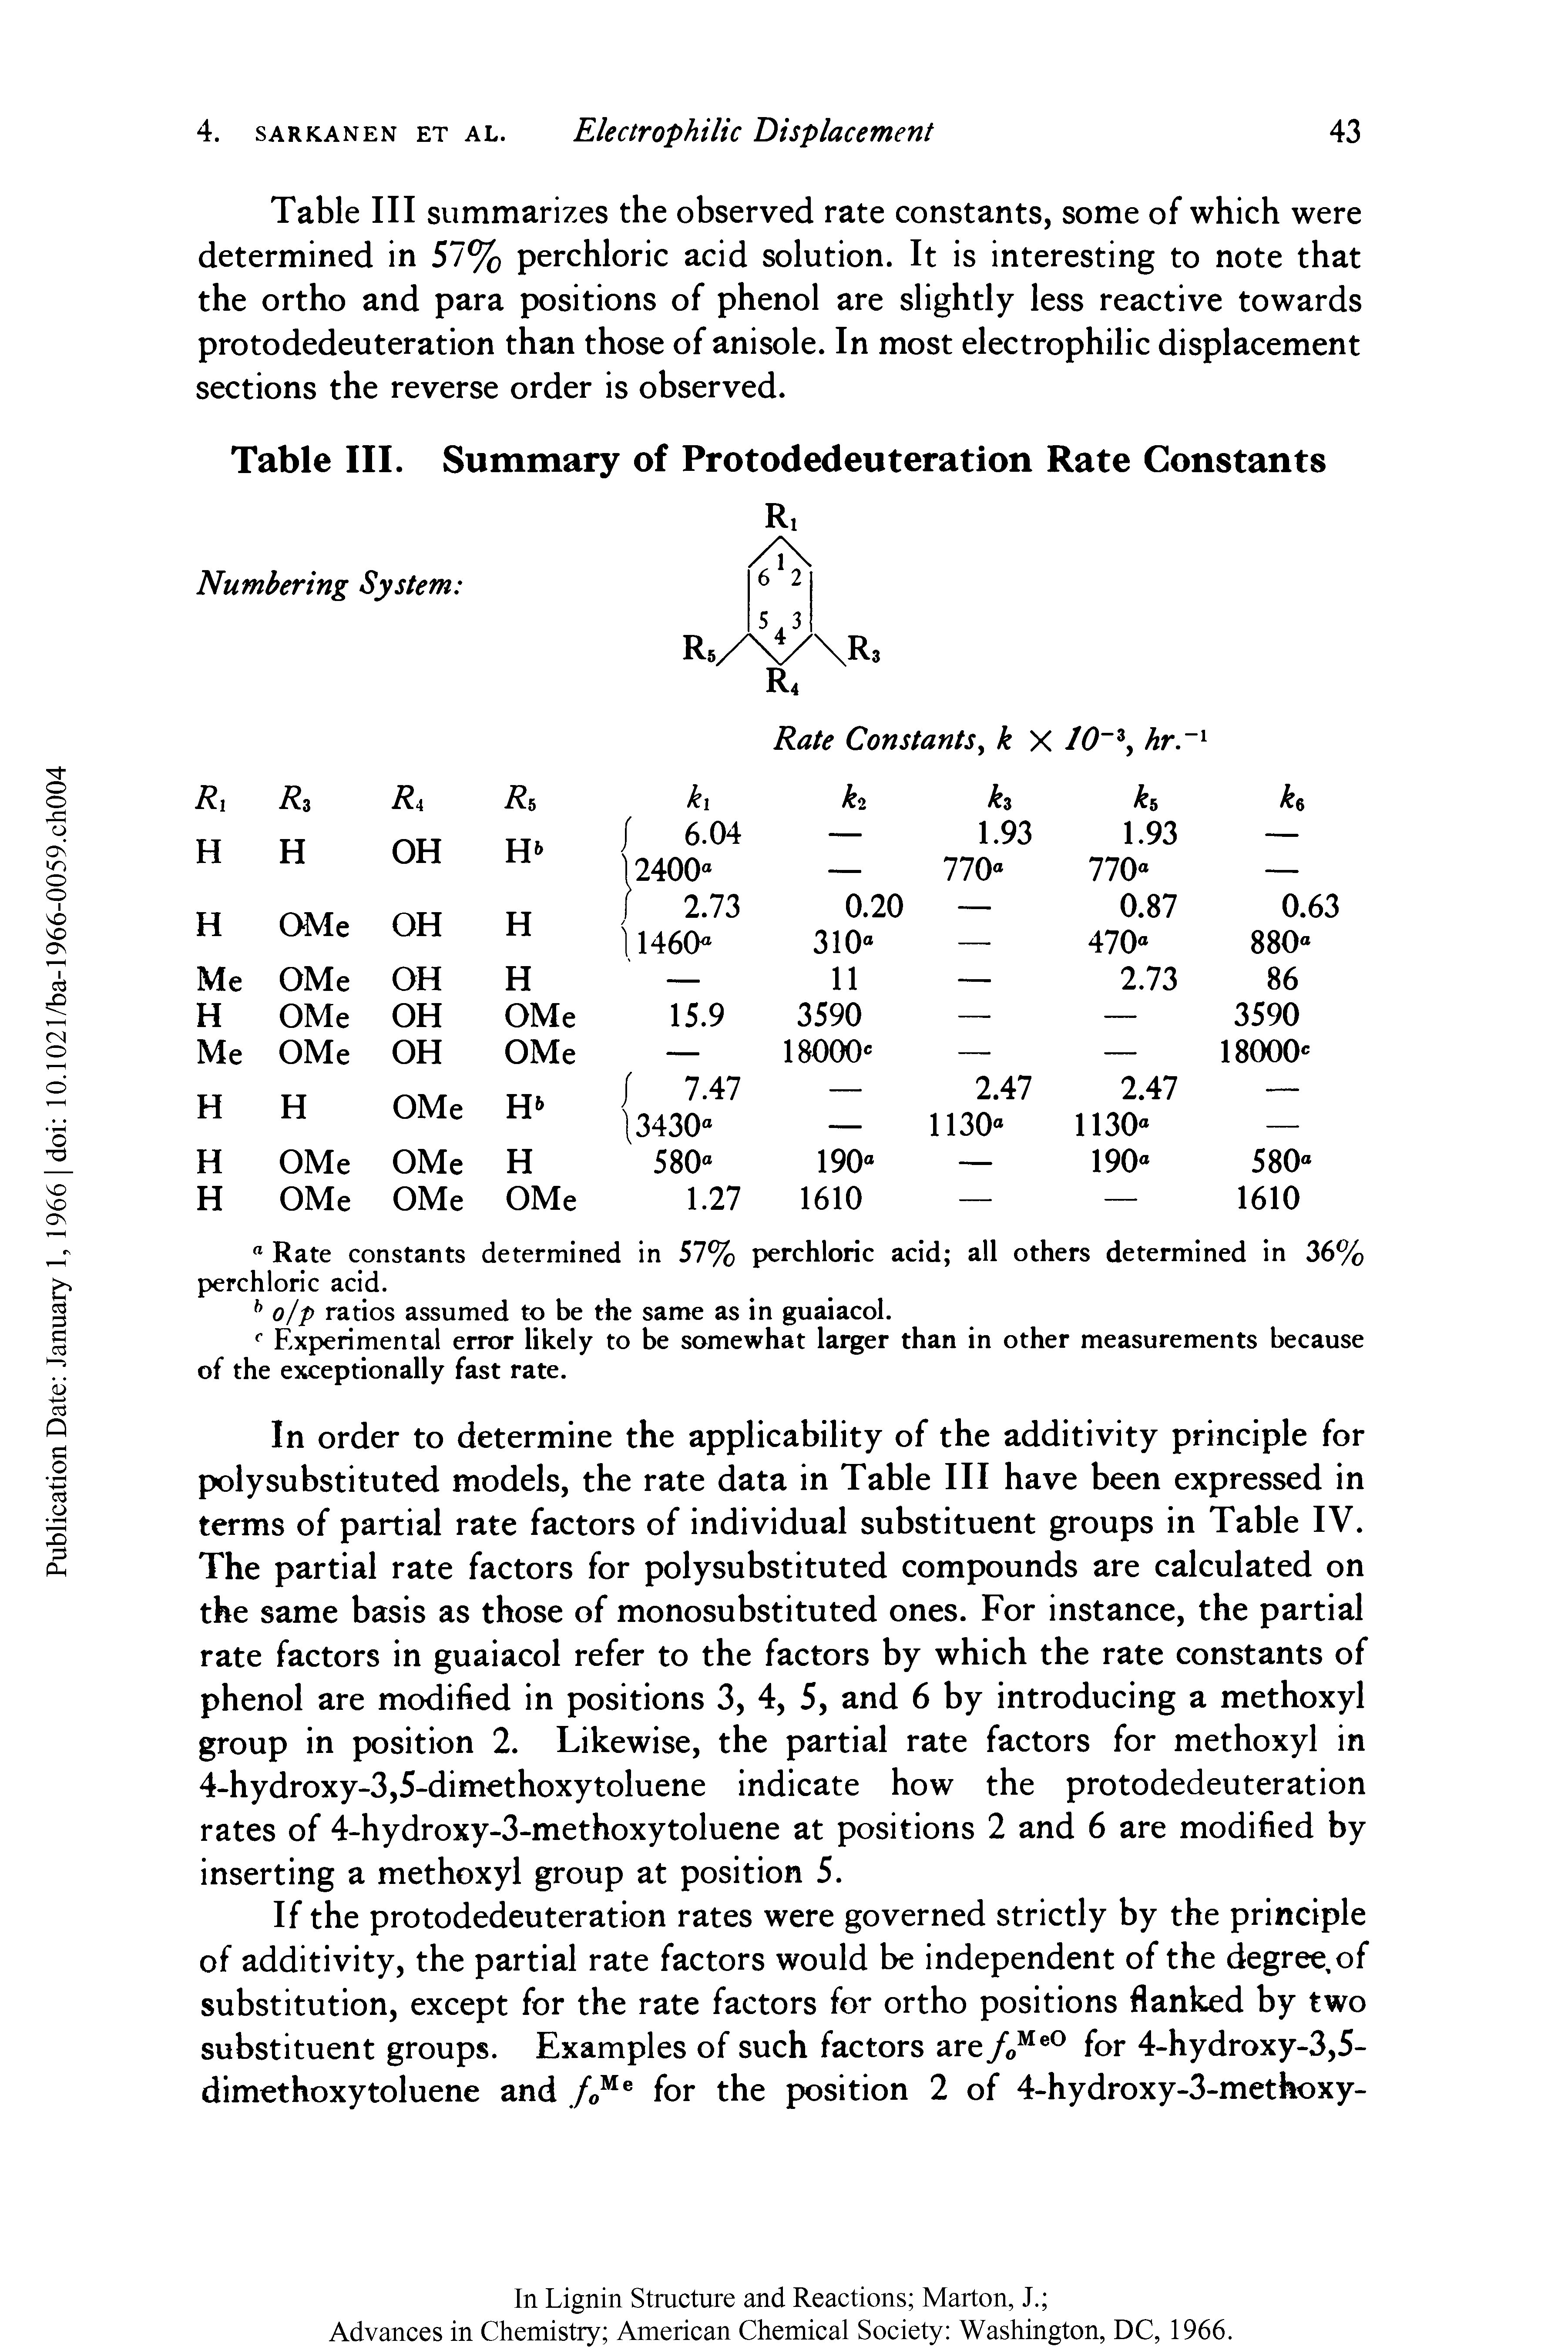 Table III summarizes the observed rate constants, some of which were determined in 57% perchloric acid solution. It is interesting to note that the ortho and para positions of phenol are slightly less reactive towards protodedeuteration than those of anisole. In most electrophilic displacement sections the reverse order is observed.